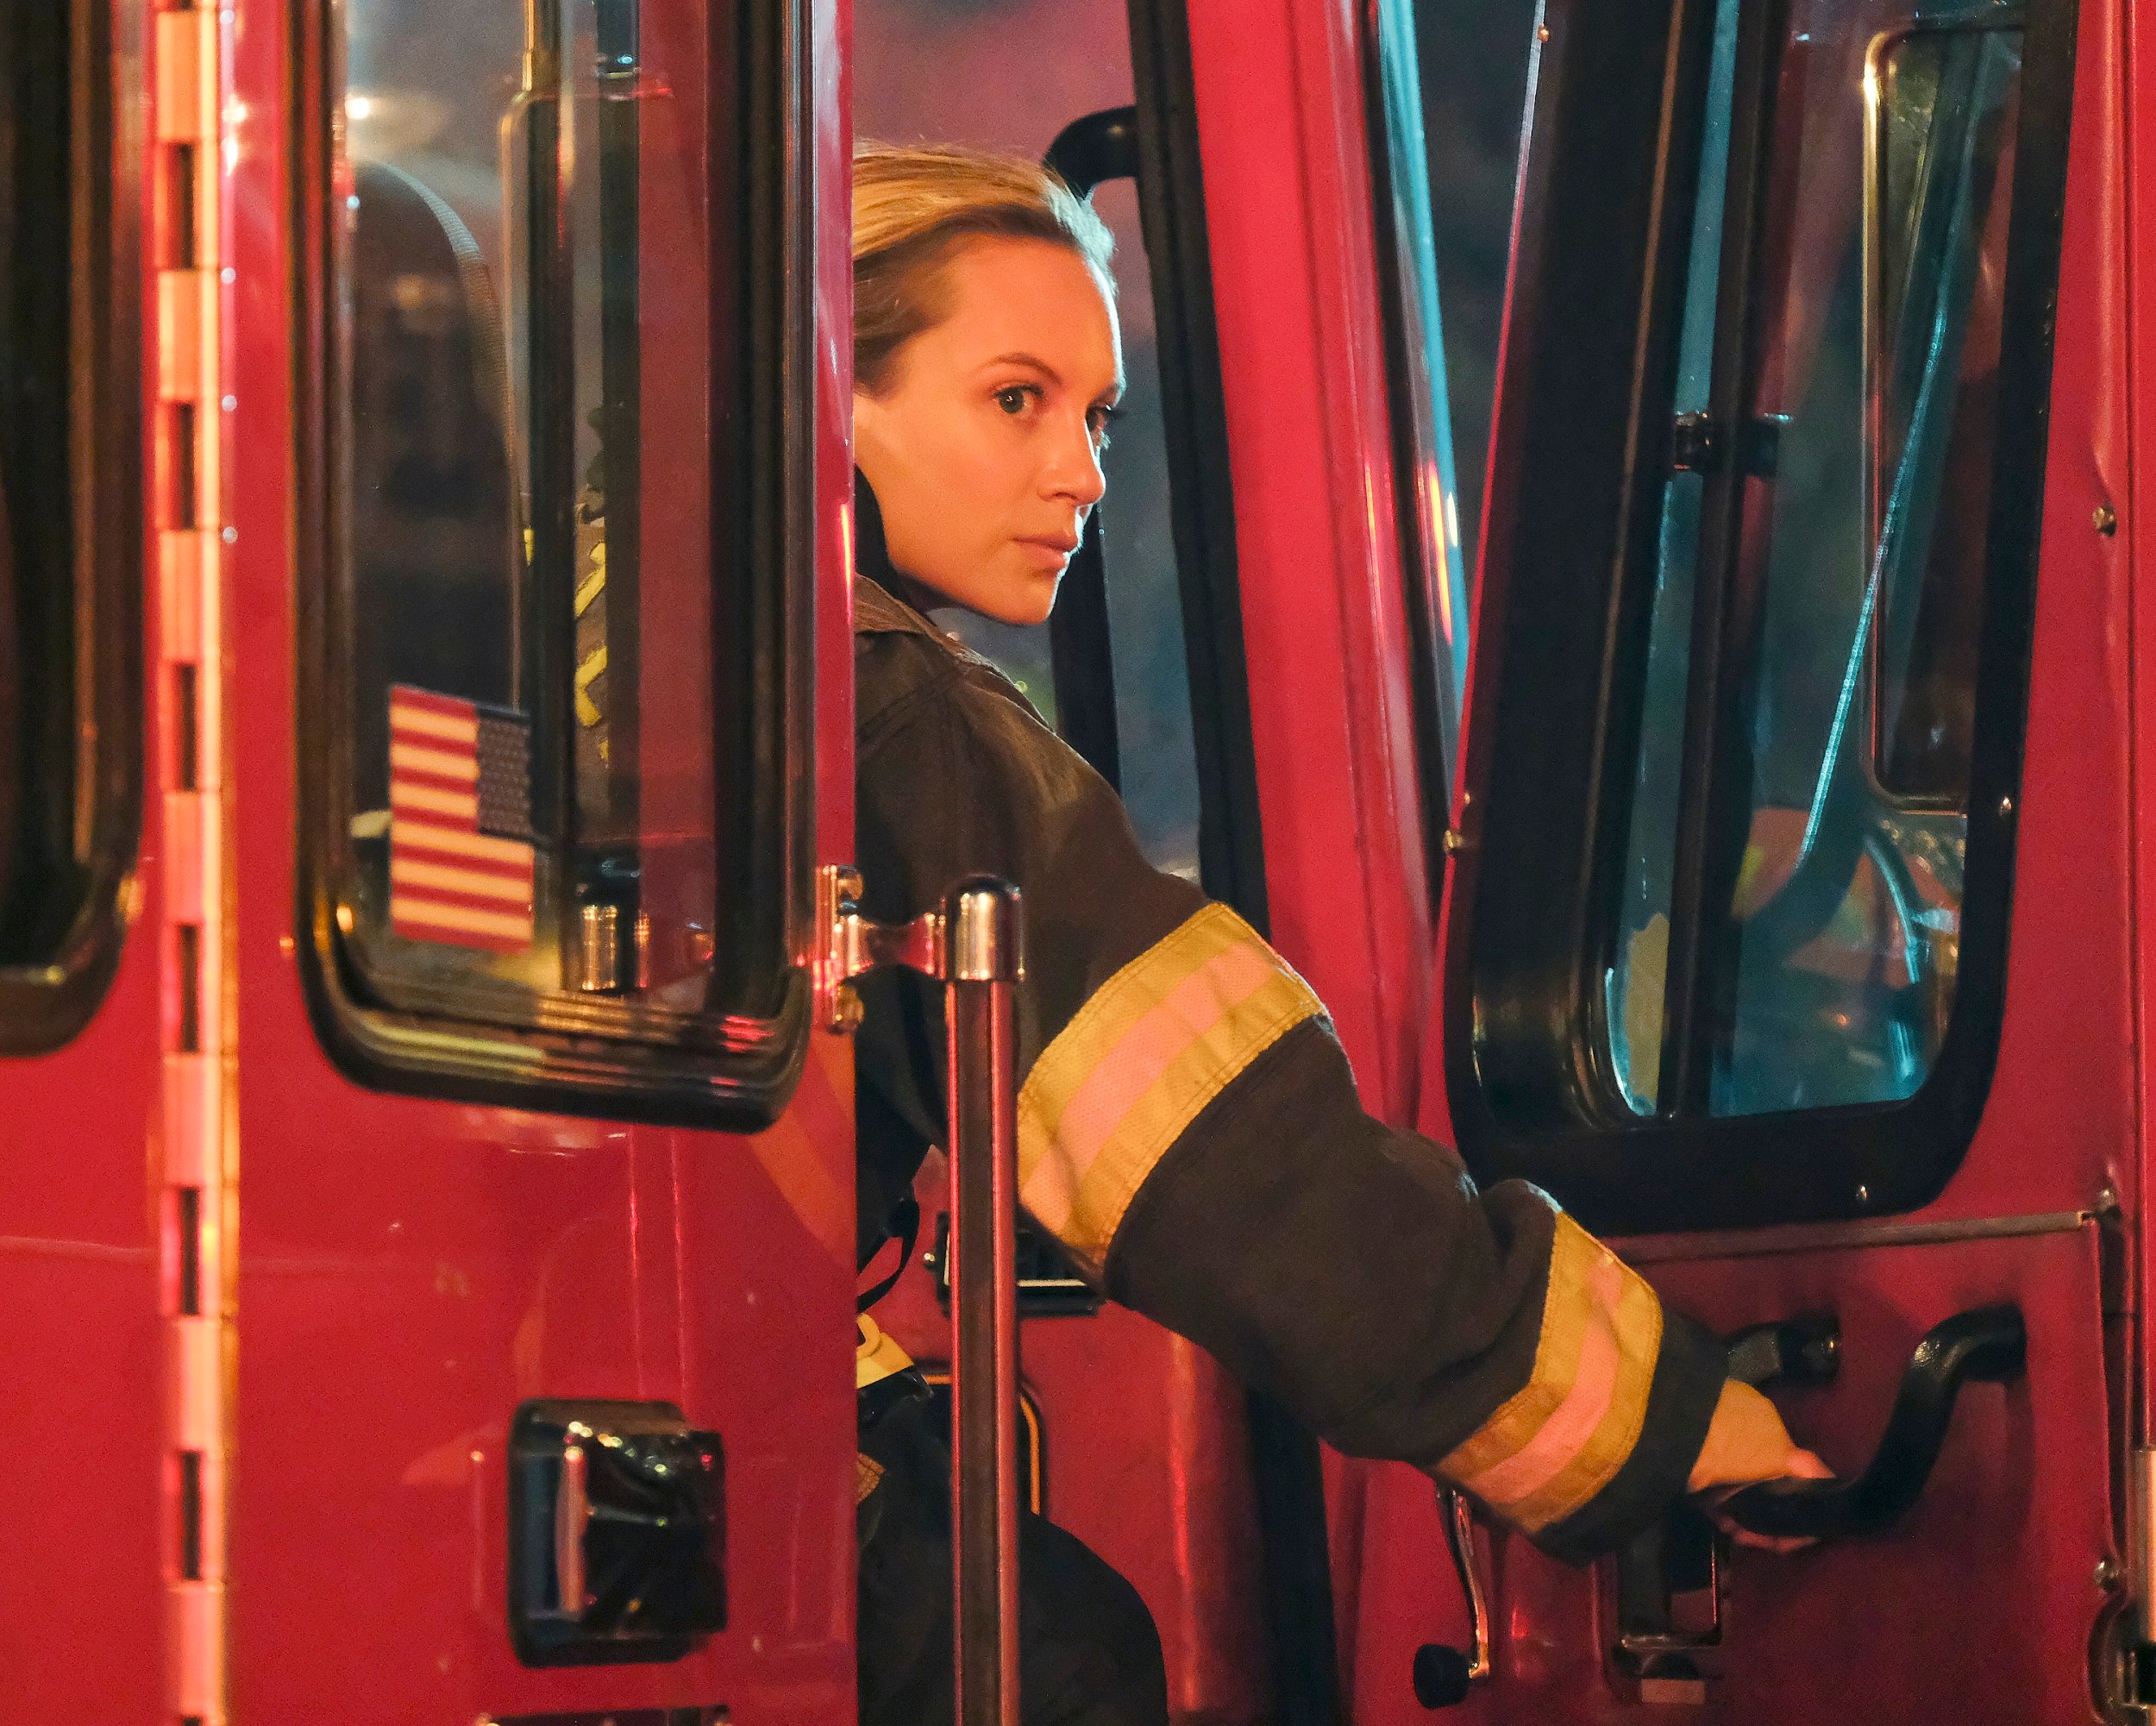 'Station 19' star Danielle Savre as Maya Bishop looking out the door of a fire engine